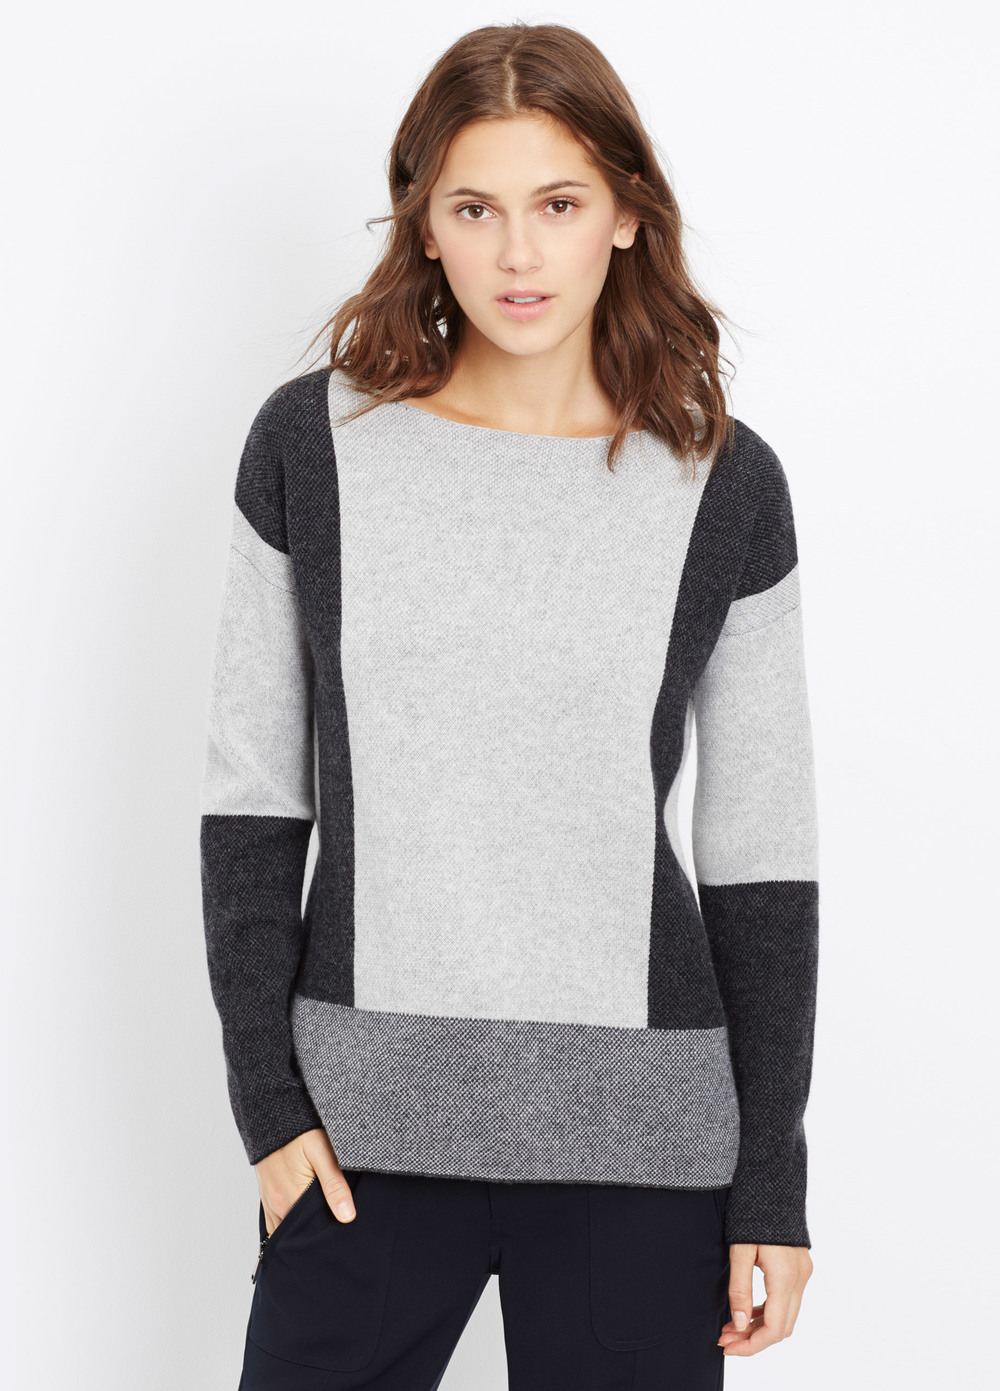  Vince Wool Cashmere Intarsia Colorblock Sweater. Available in two colors. Vince. Was: $345 Now: $138.  